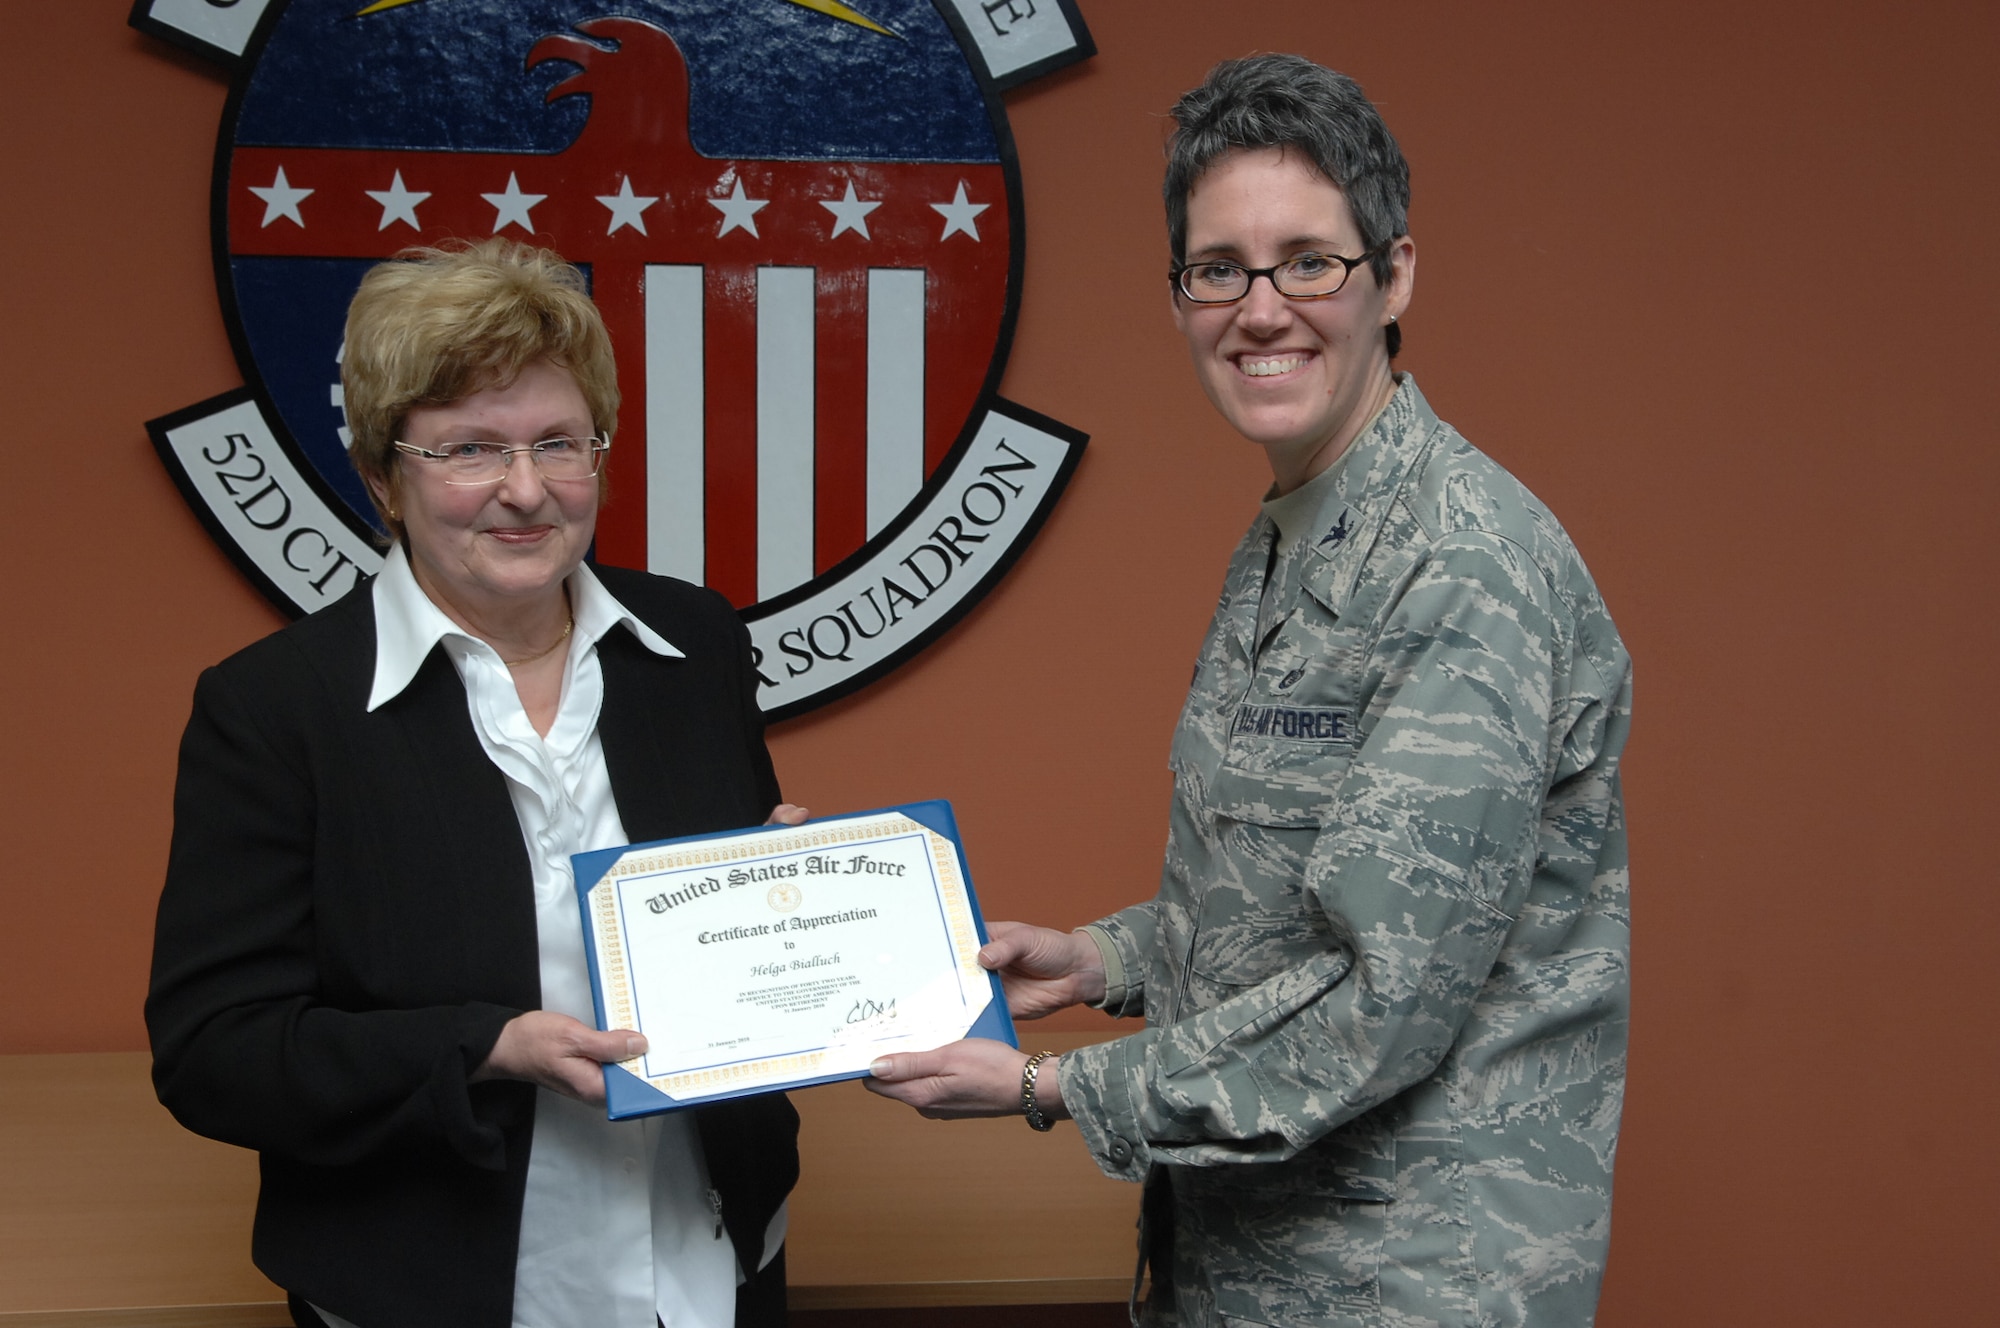 SPANGDAHLEM AIR BASE, Germany -- Col. Jodine Tooke, 52nd Mission Support Group commander, presents a certificate of appreciation to Helga E. Bialluch, retired 52nd Civil Engineer Squadron manpower technician, for her 43 years of dedication and service to Spangdahlem Air Base during her retirement ceremony Jan. 29 in the 52nd CES conference room. Mrs. Bialluch's job was significant to the Air Force and 52nd Fighter Wing because she was responsible for all 52nd CES manpower resources. (U.S. Air Force photo/Airman 1st Class Nick Wilson)